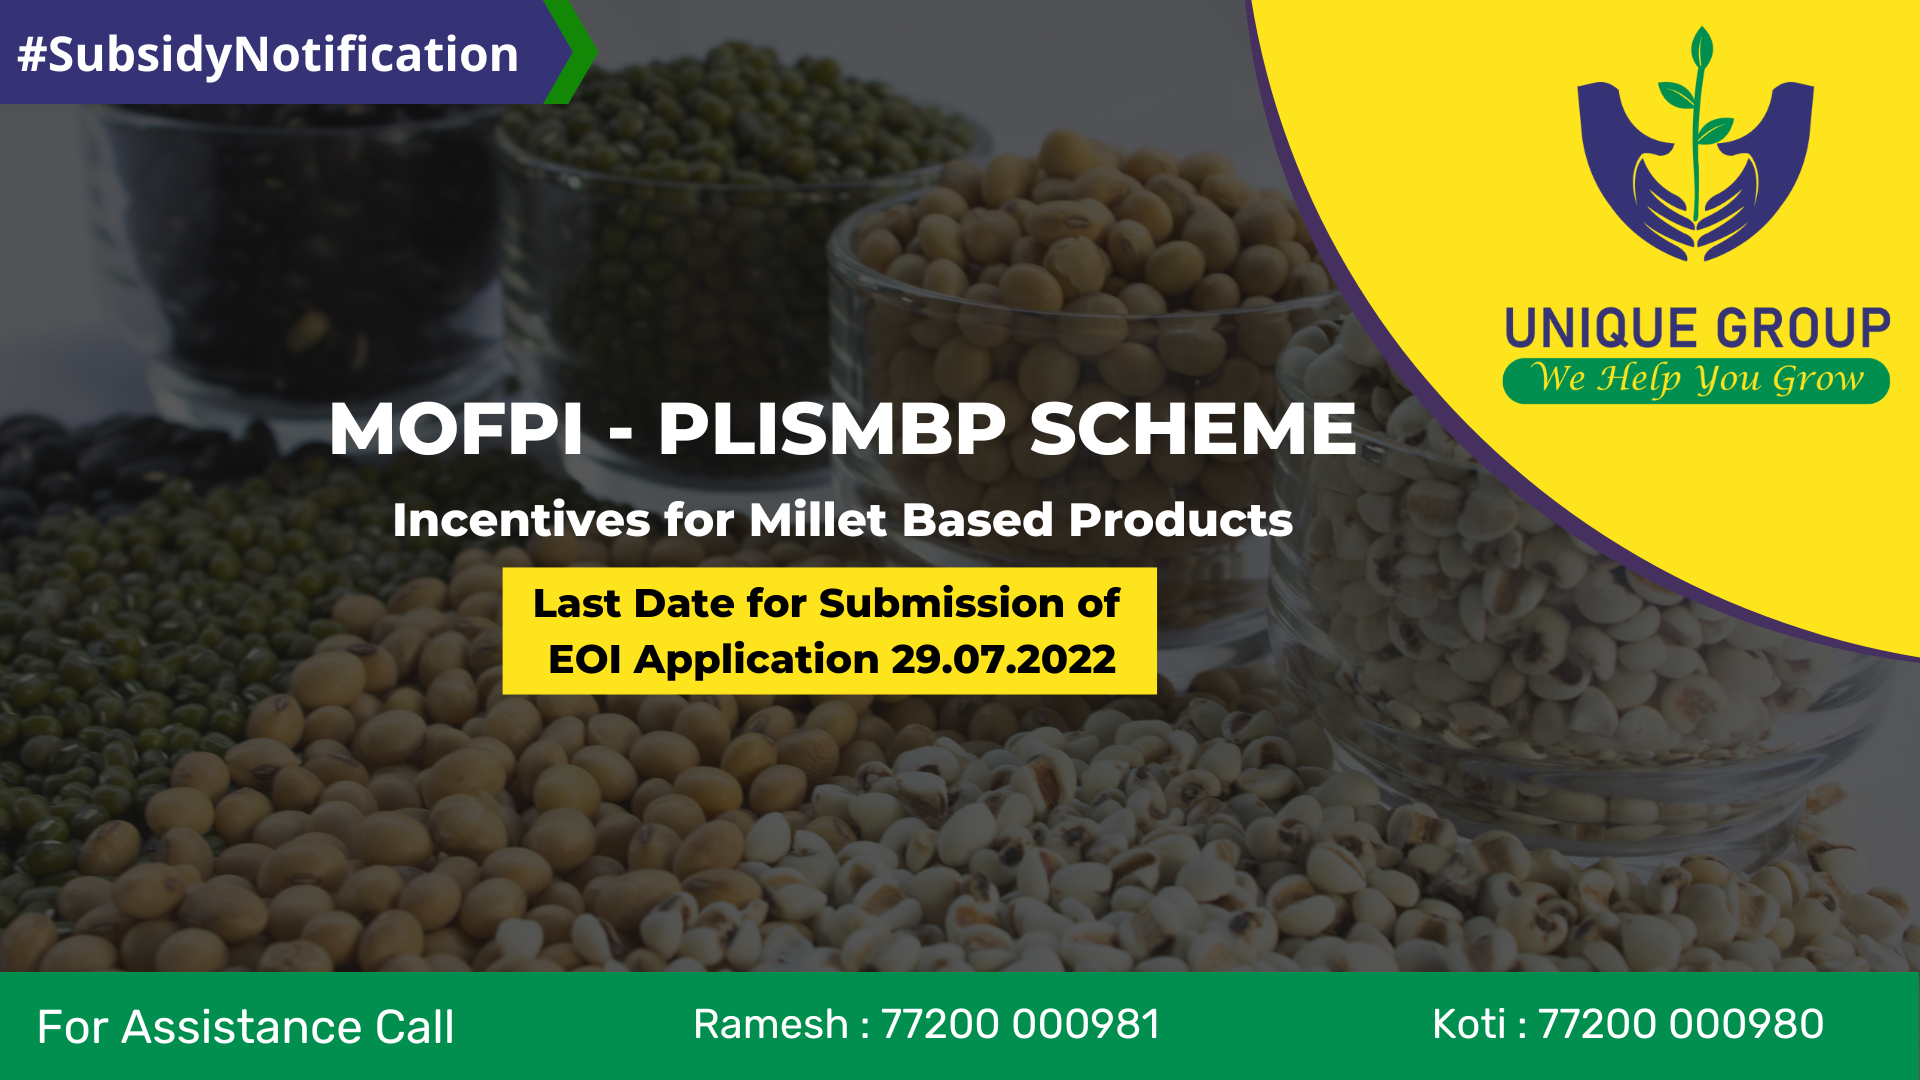 MoFPI is inviting applications (EOI) for Millet PLI scheme